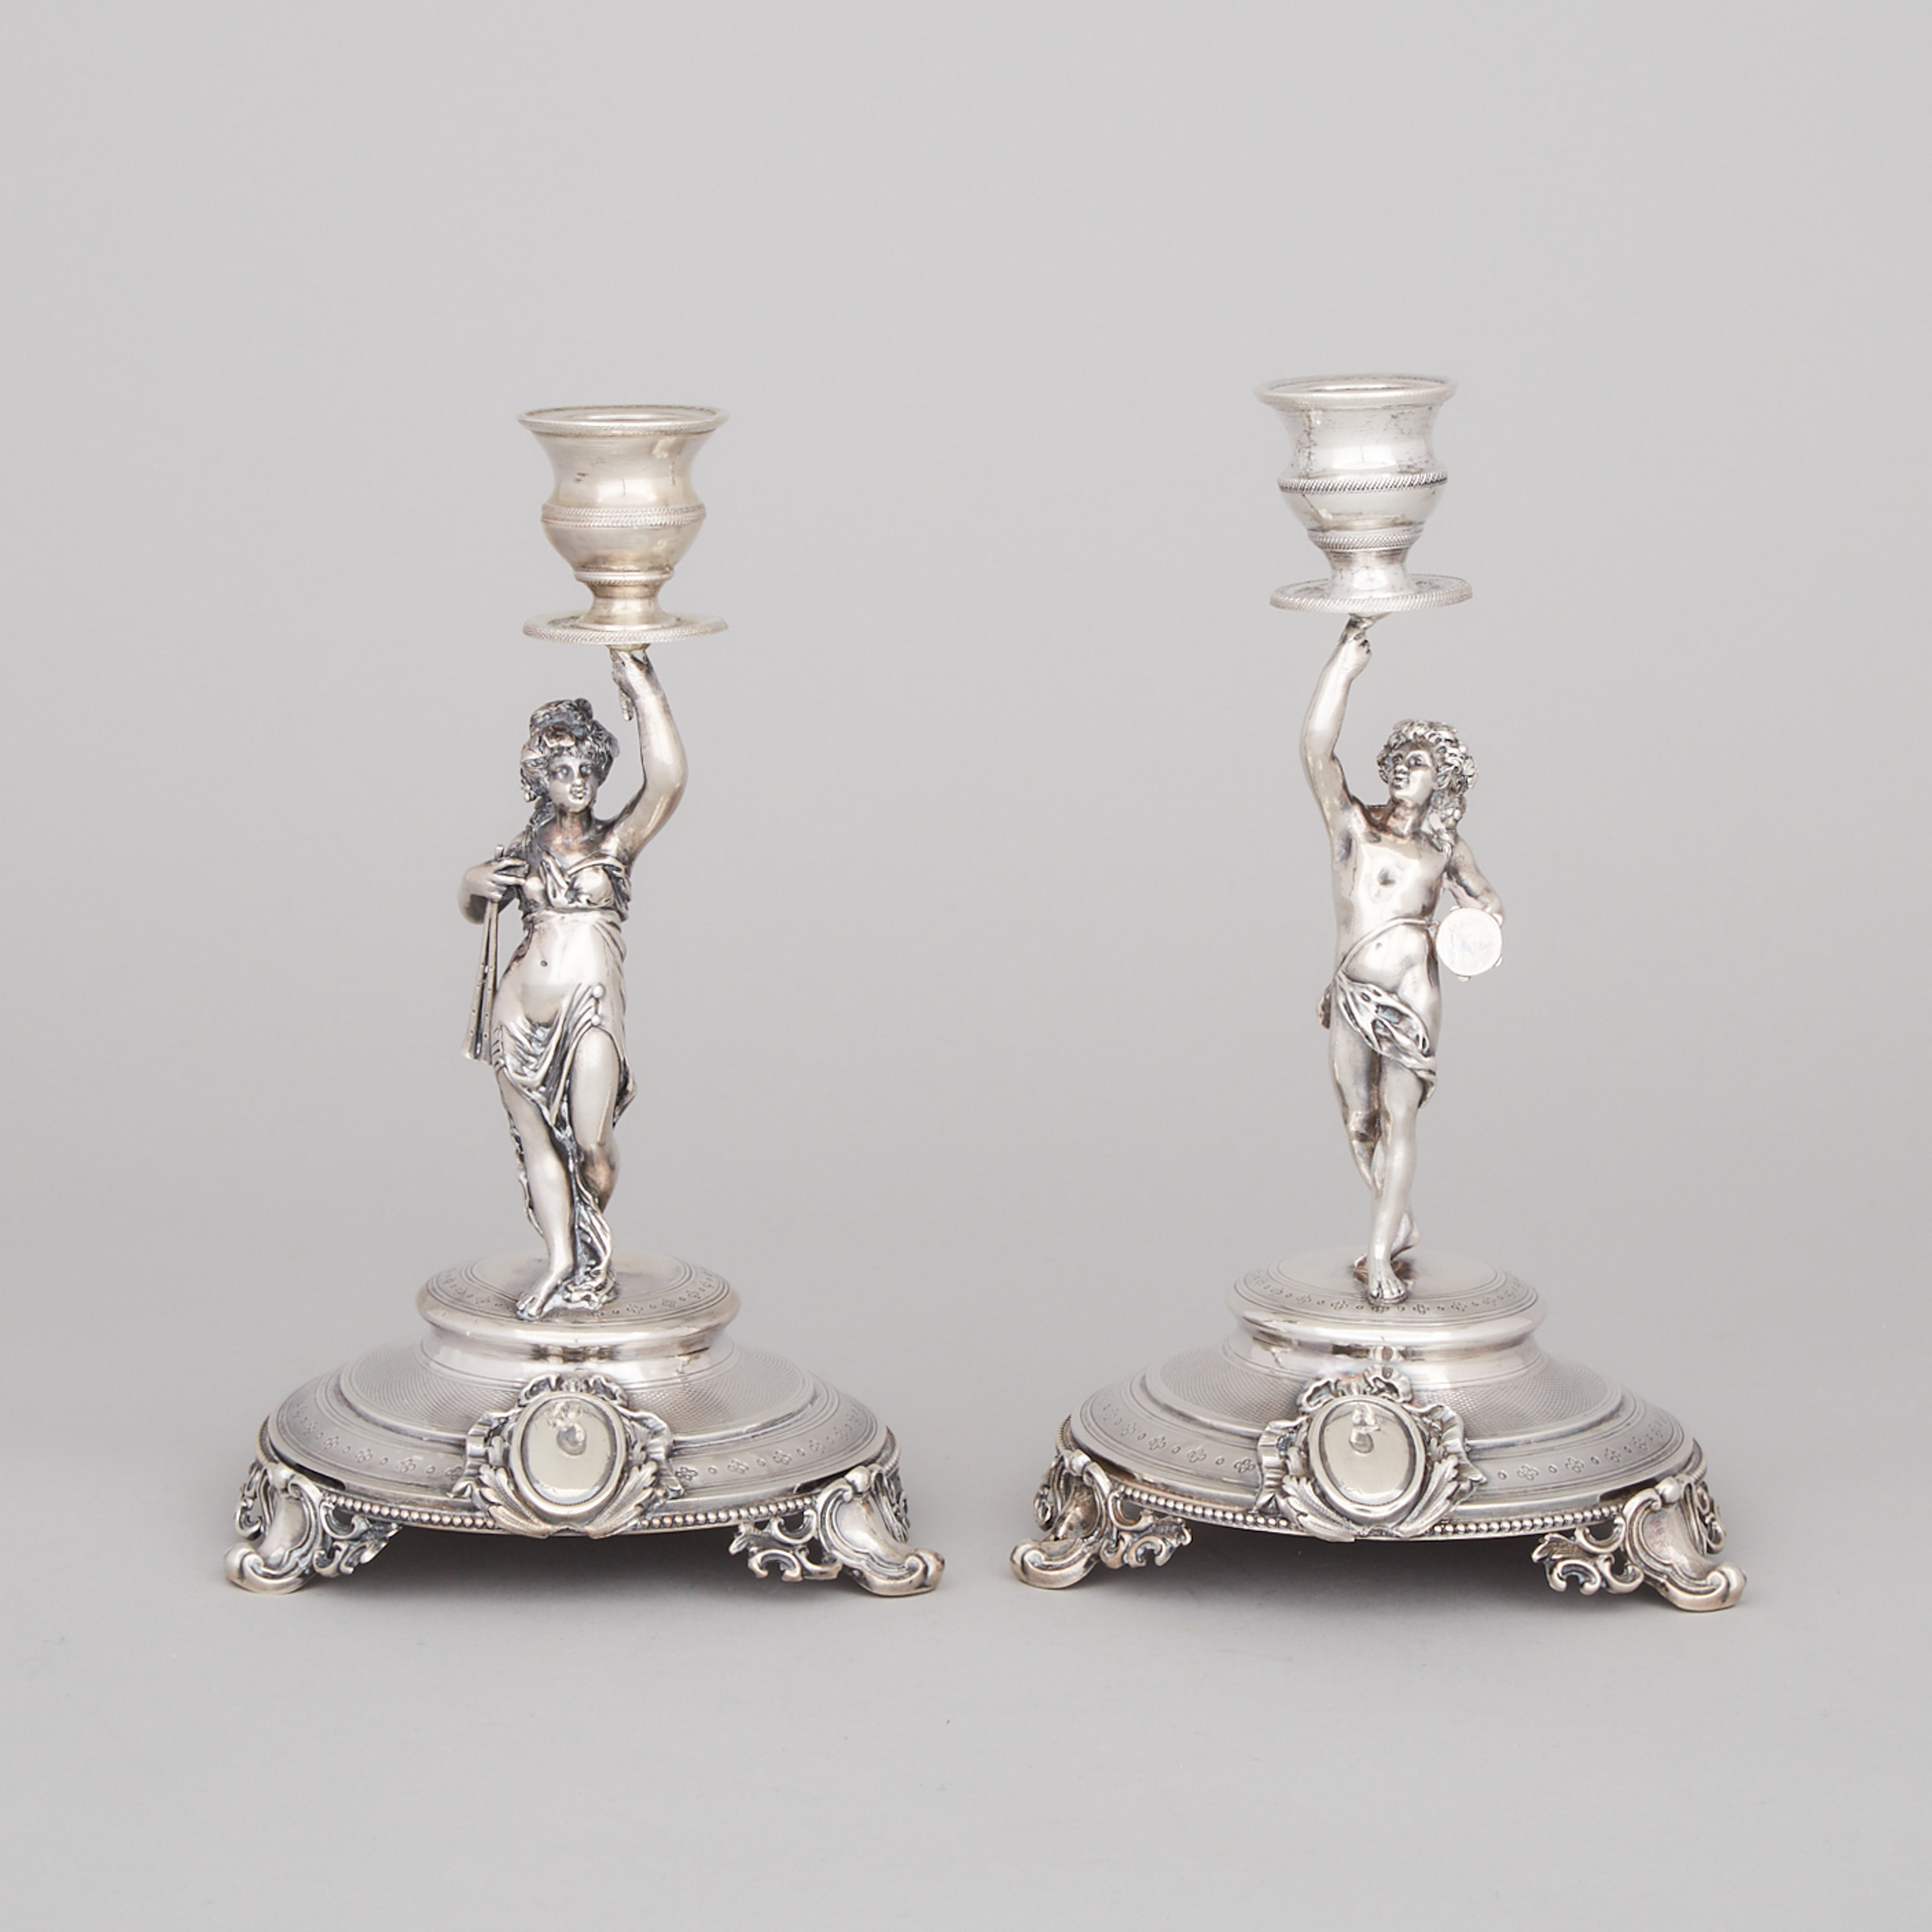 Pair of French Silver Candlesticks, mid-19th century